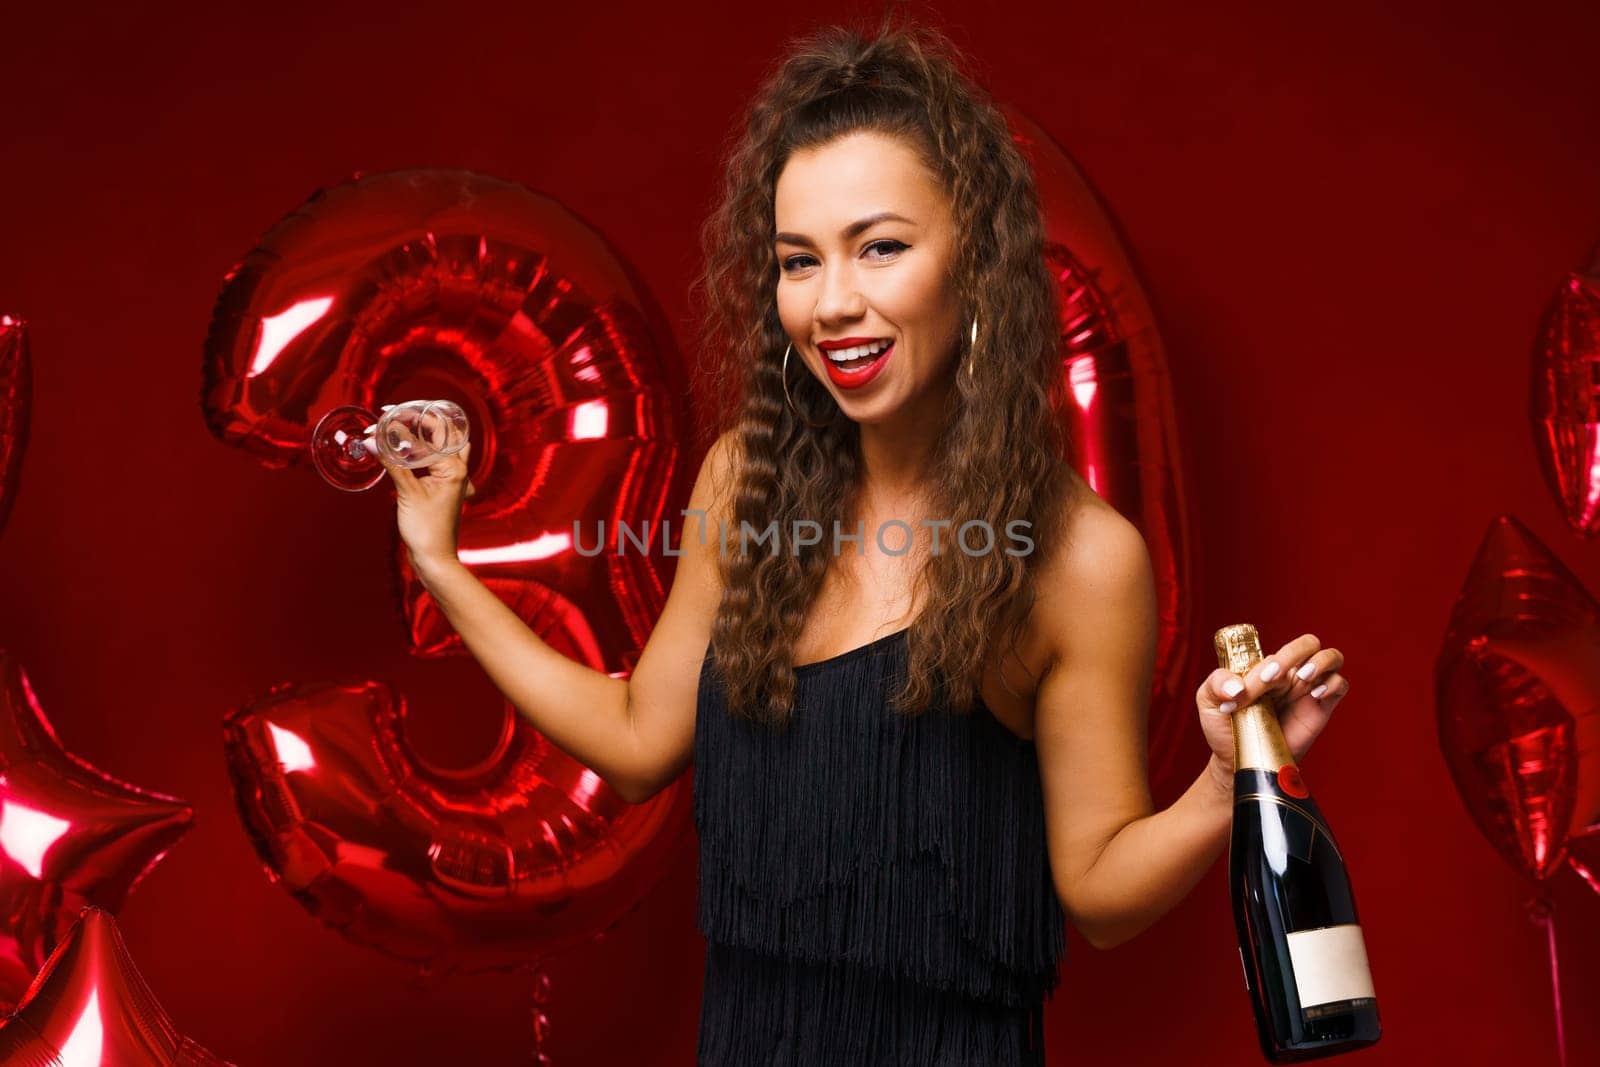 Beautiful woman posing on a red background with balloons holding a bottle of champagne in her hand. Cheerful girl of Caucasian appearance with wavy hair and bright makeup celebrates her 30th birthday